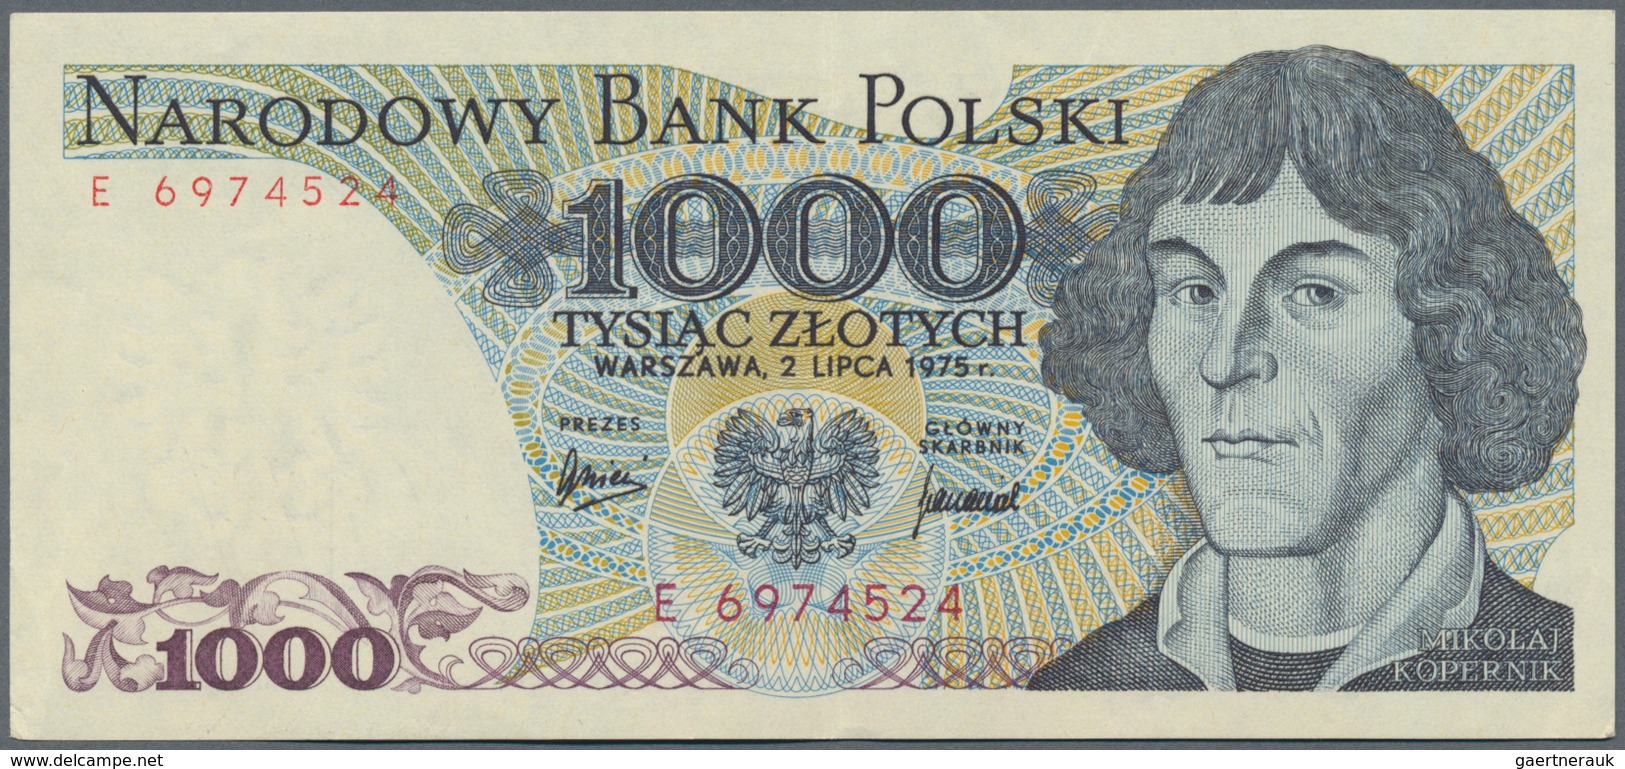 Poland / Polen: Very nice set with 23 Banknotes 10 - 200.000 Zlotych 1975-1989, P.142a-155a in F+ to